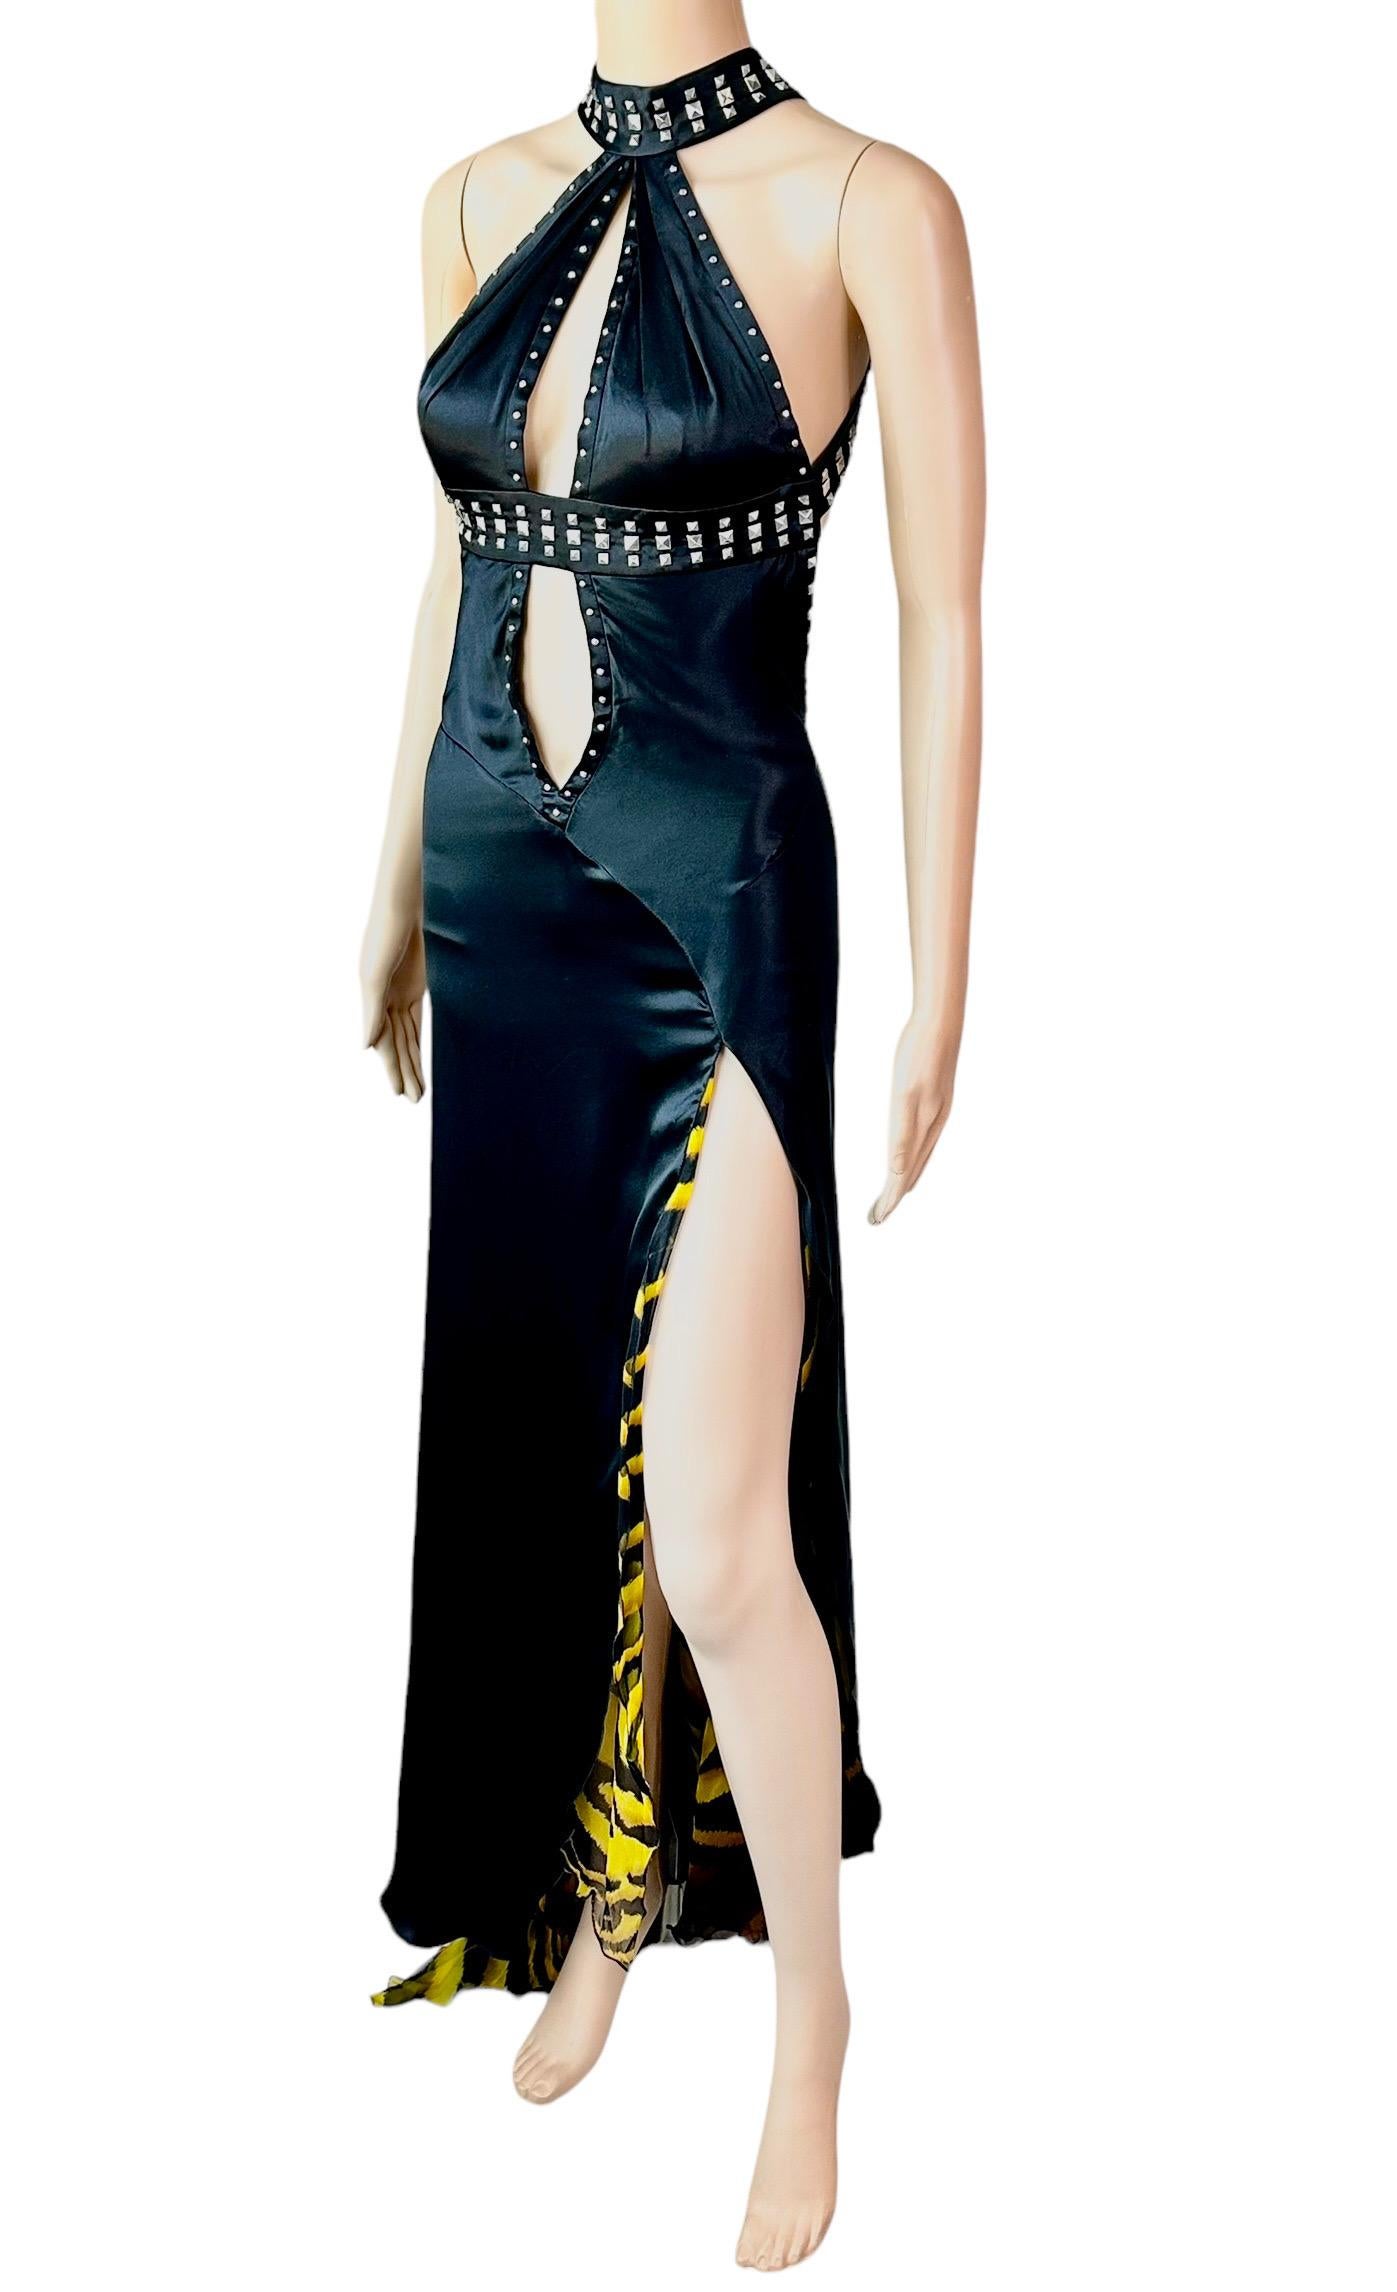 Women's Versace F/W 2004 Runway Studded Plunging Keyhole Neckline Evening Dress Gown For Sale